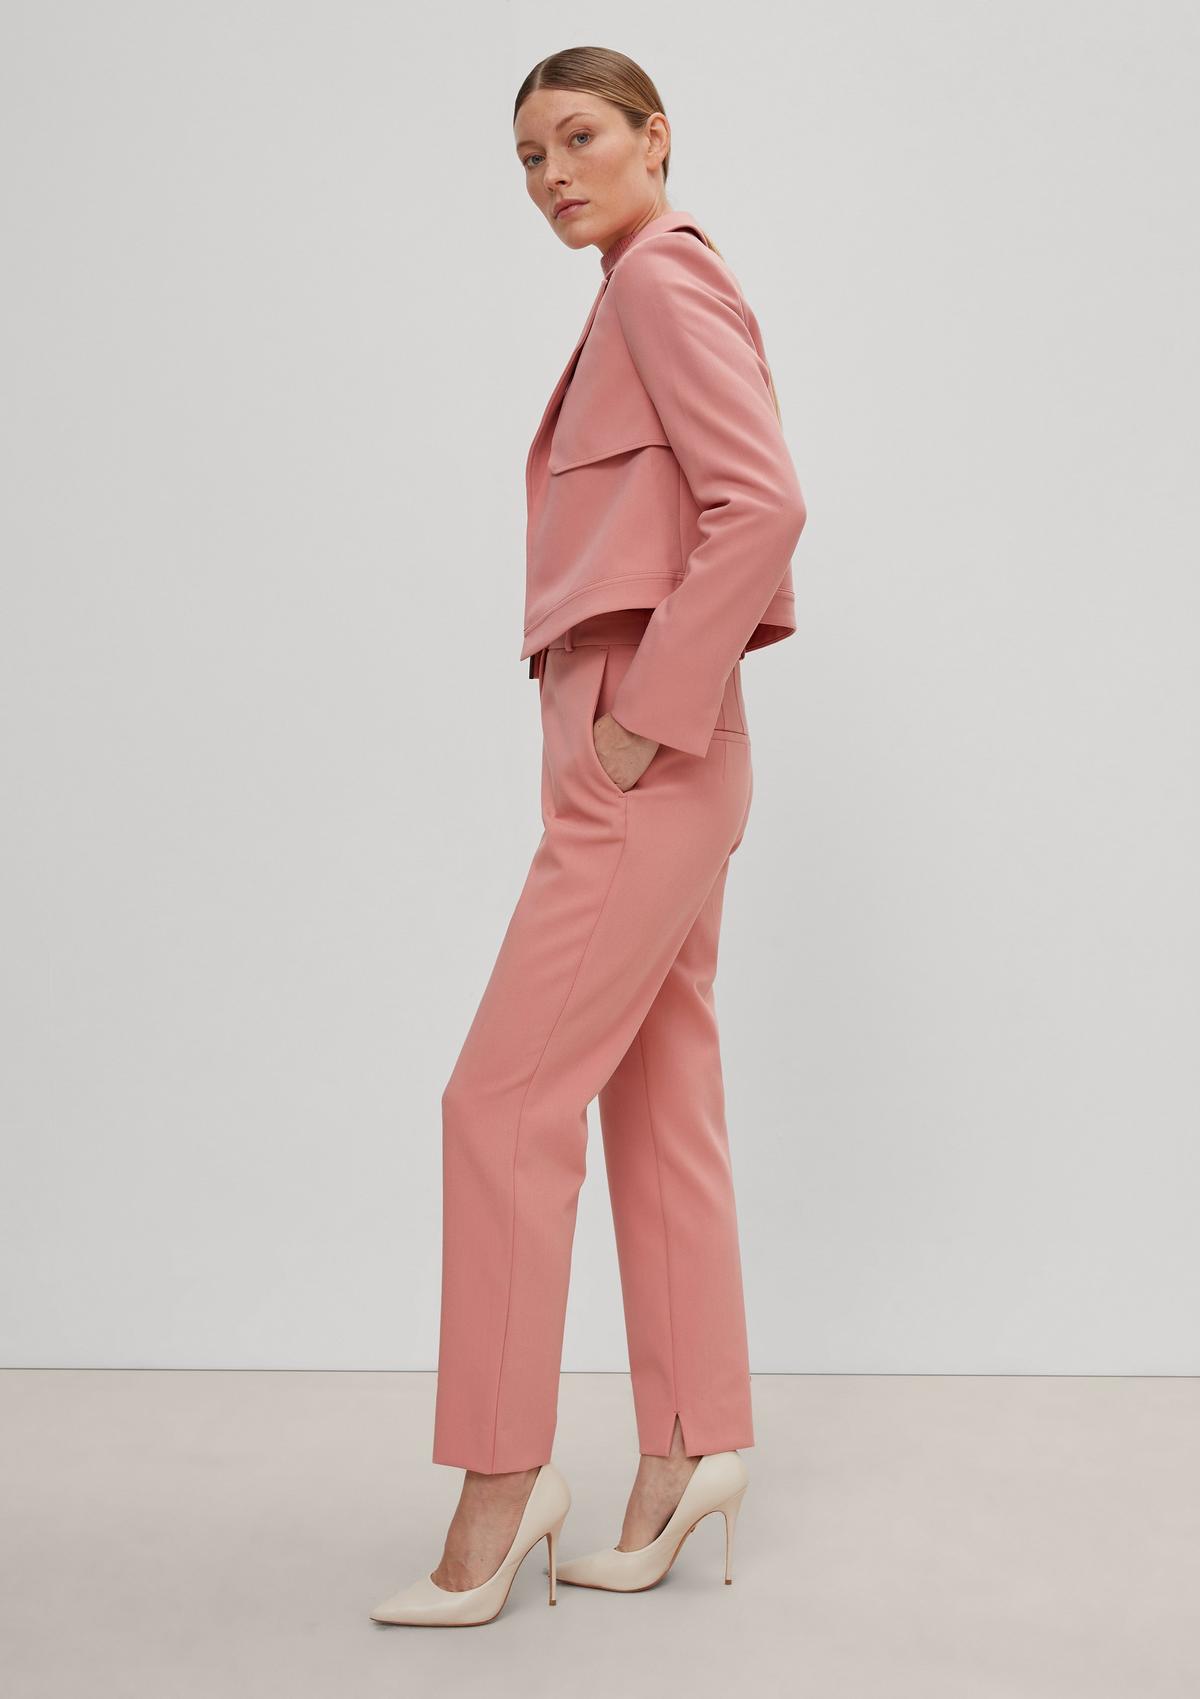 Trouser suits – stylish and elegant